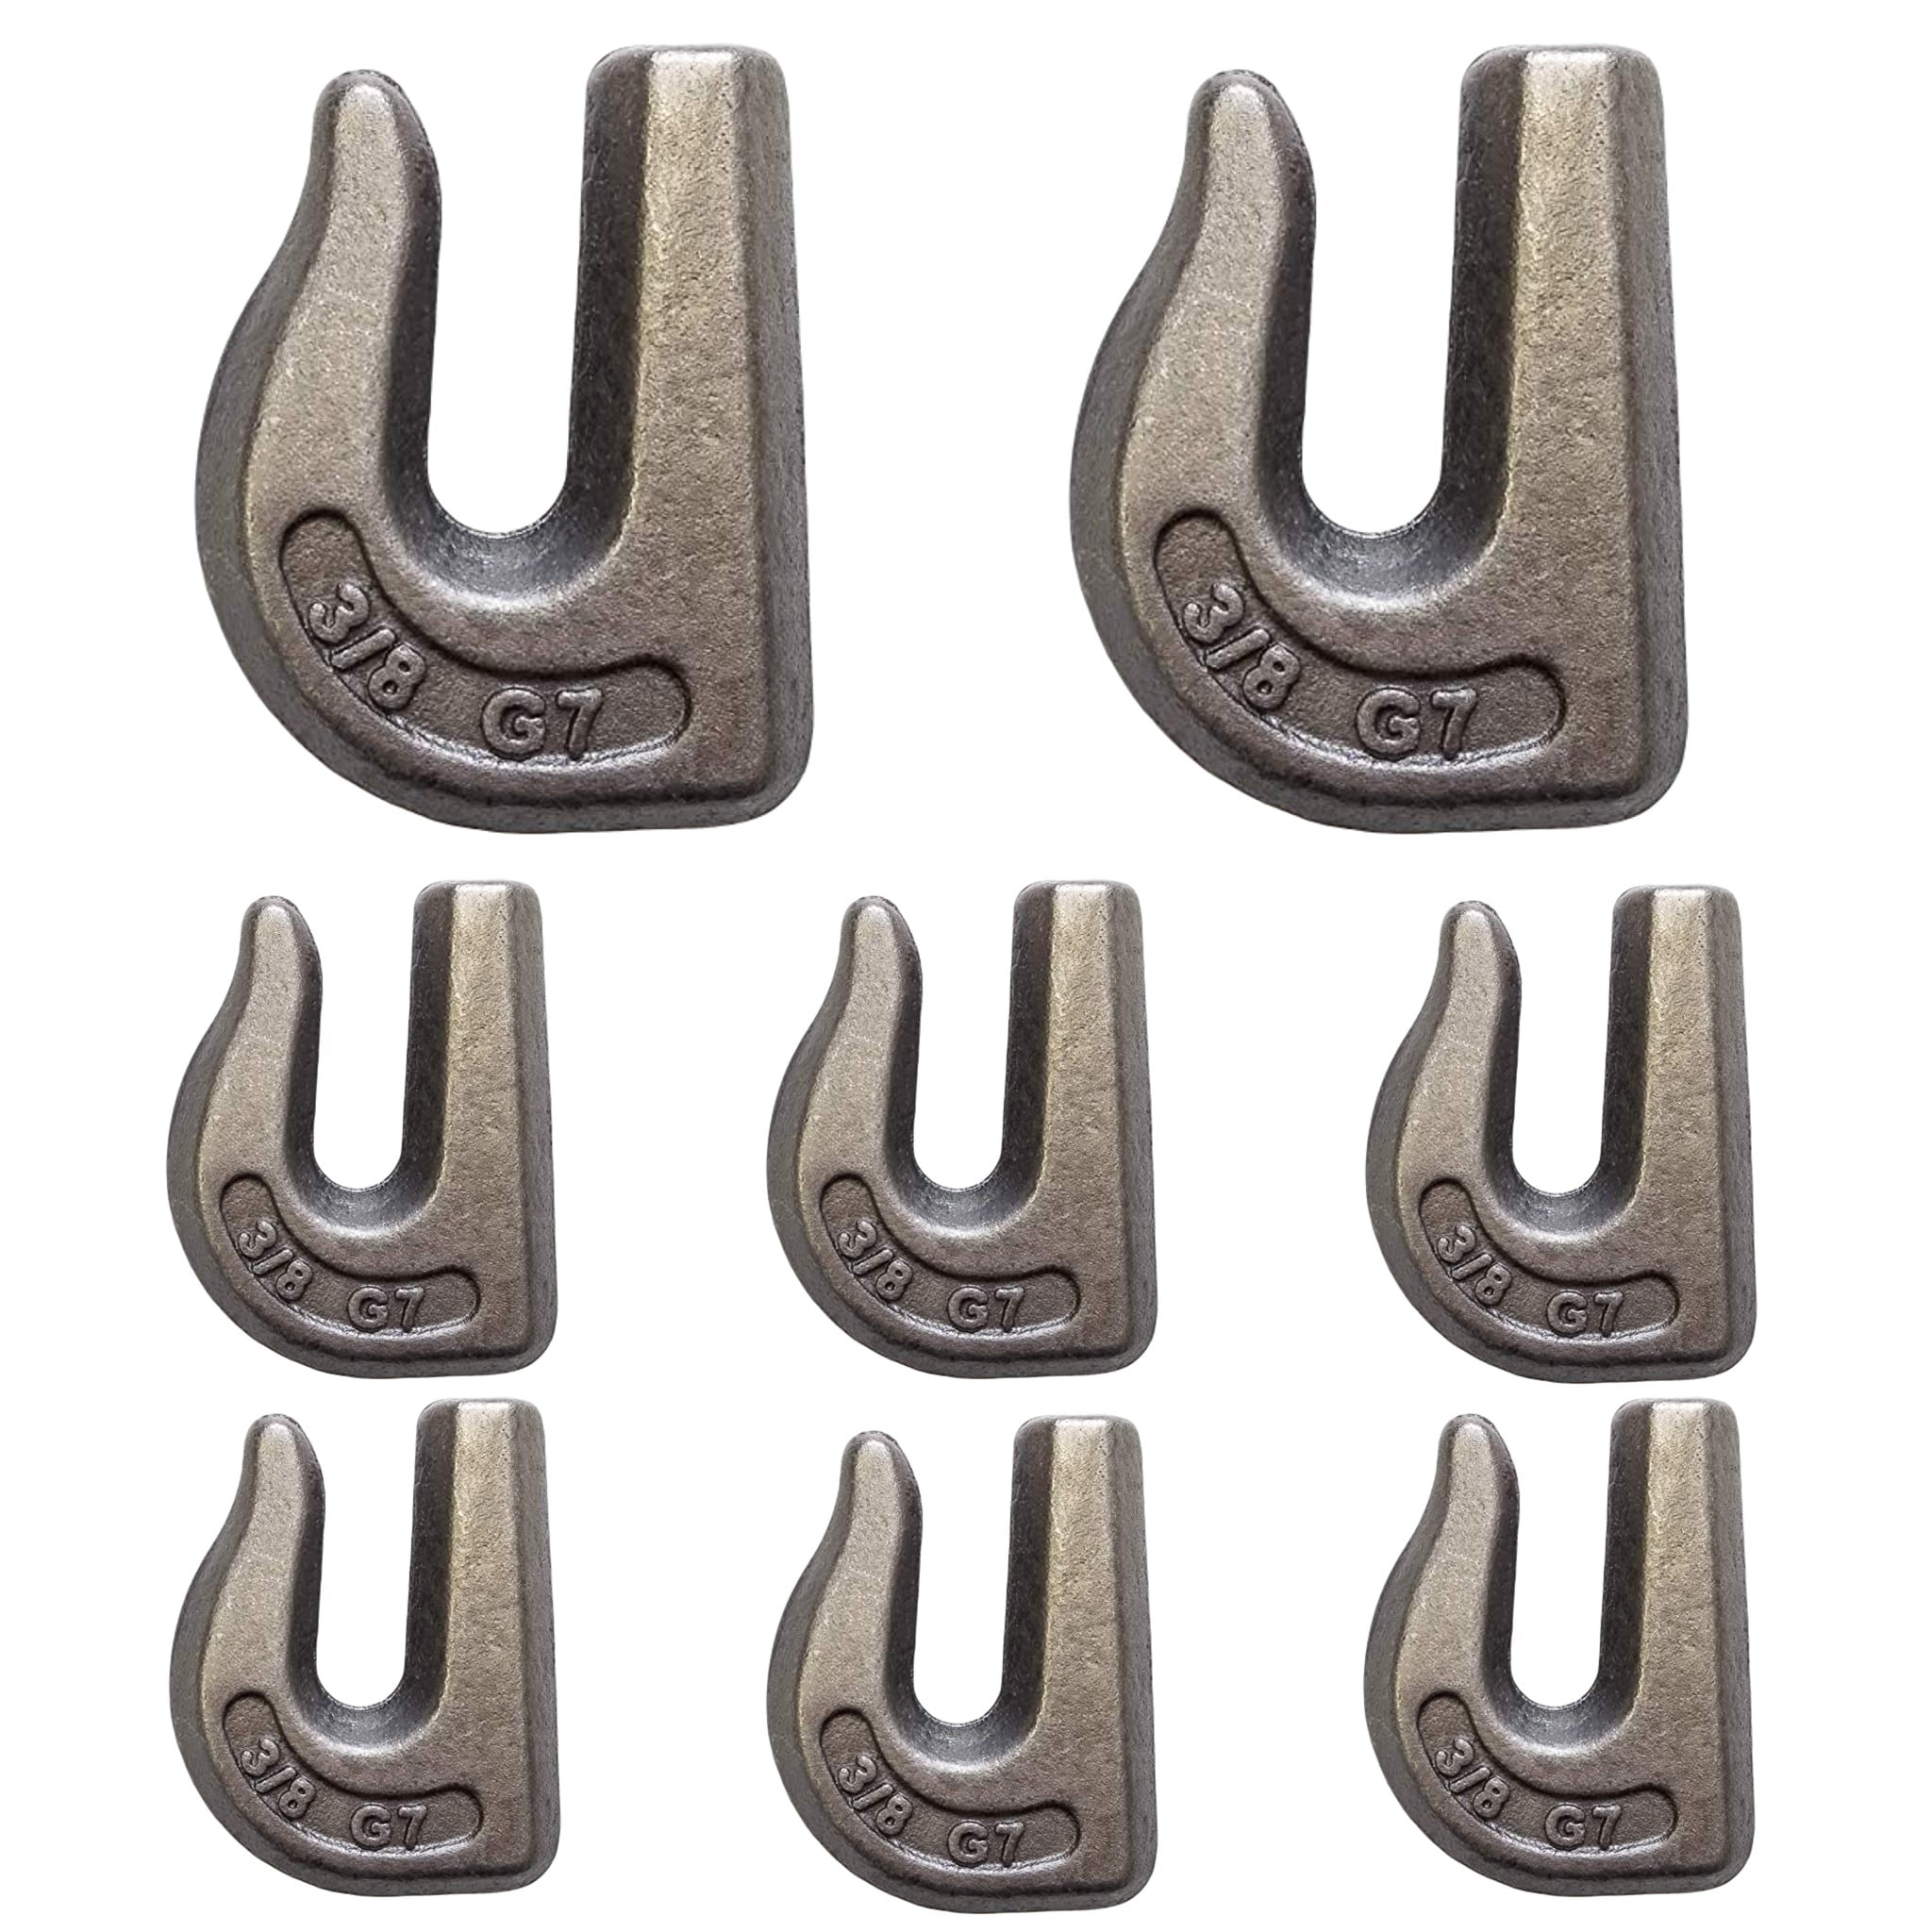 Otviap Lifting Chain Hook,swivels Eye Lifting Hook Stainless Steel Safety Lifting Hook For Engineering Cranes,stainless Steel Swivels Eye Snap Hook 65